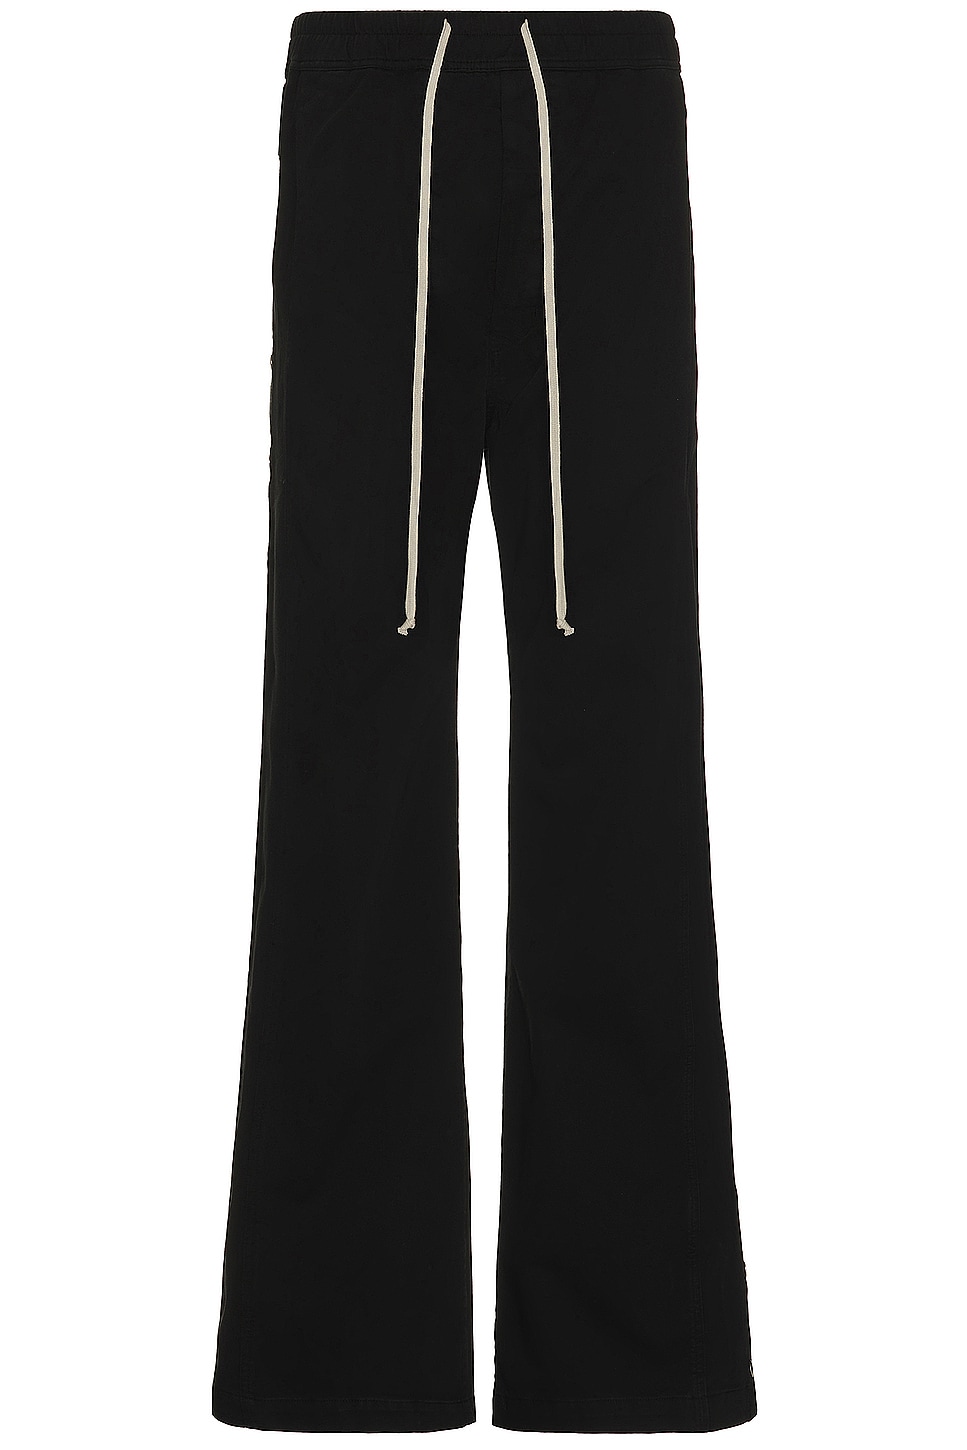 Image 1 of DRKSHDW by Rick Owens Pusher Pant in Black